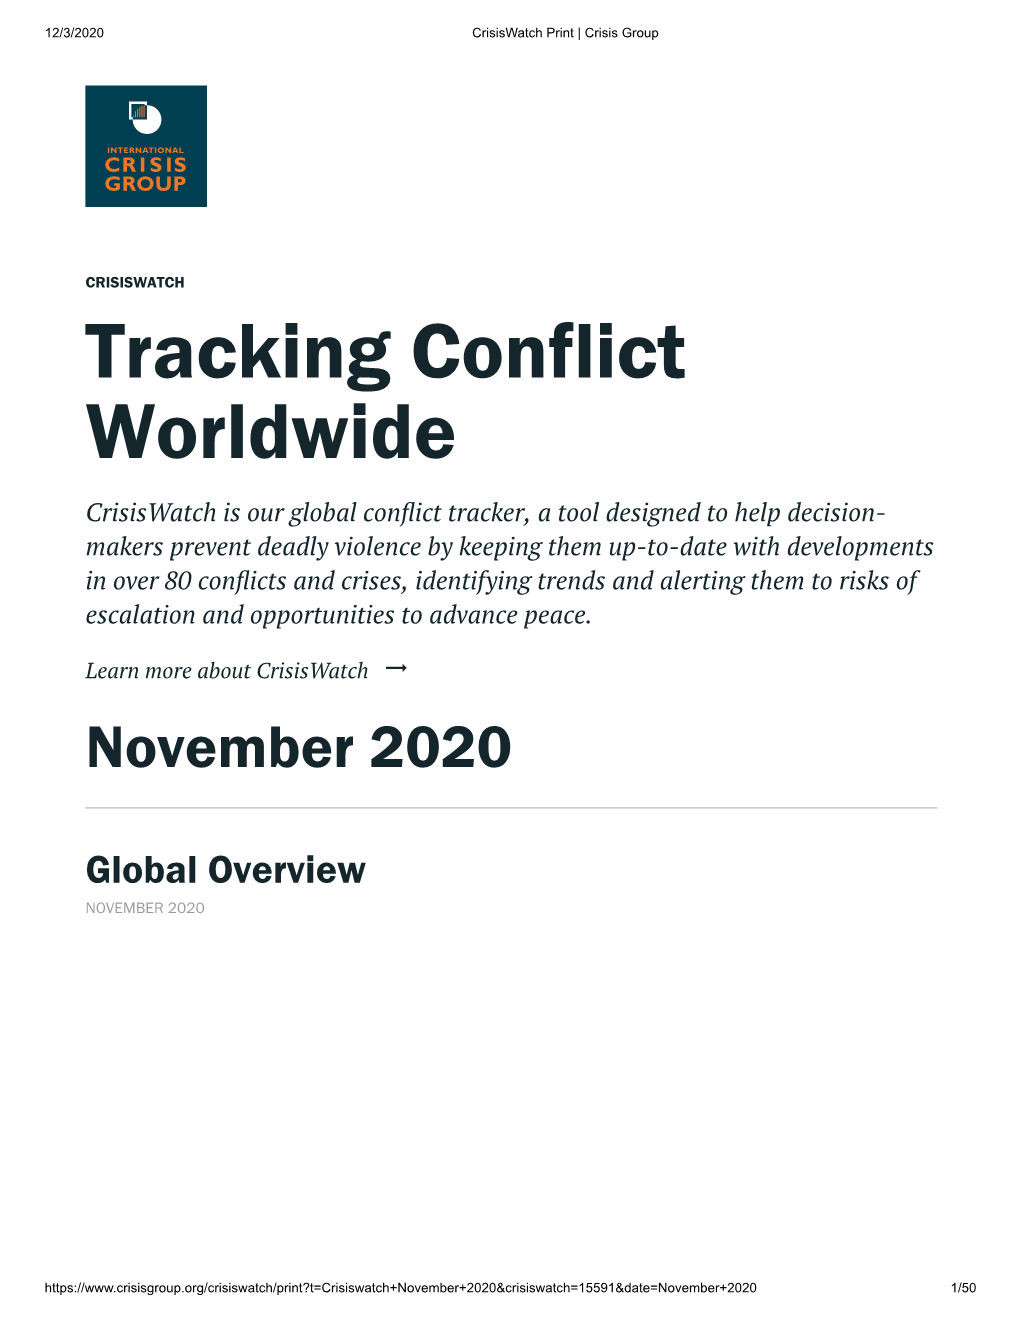 Tracking Conflict Worldwide